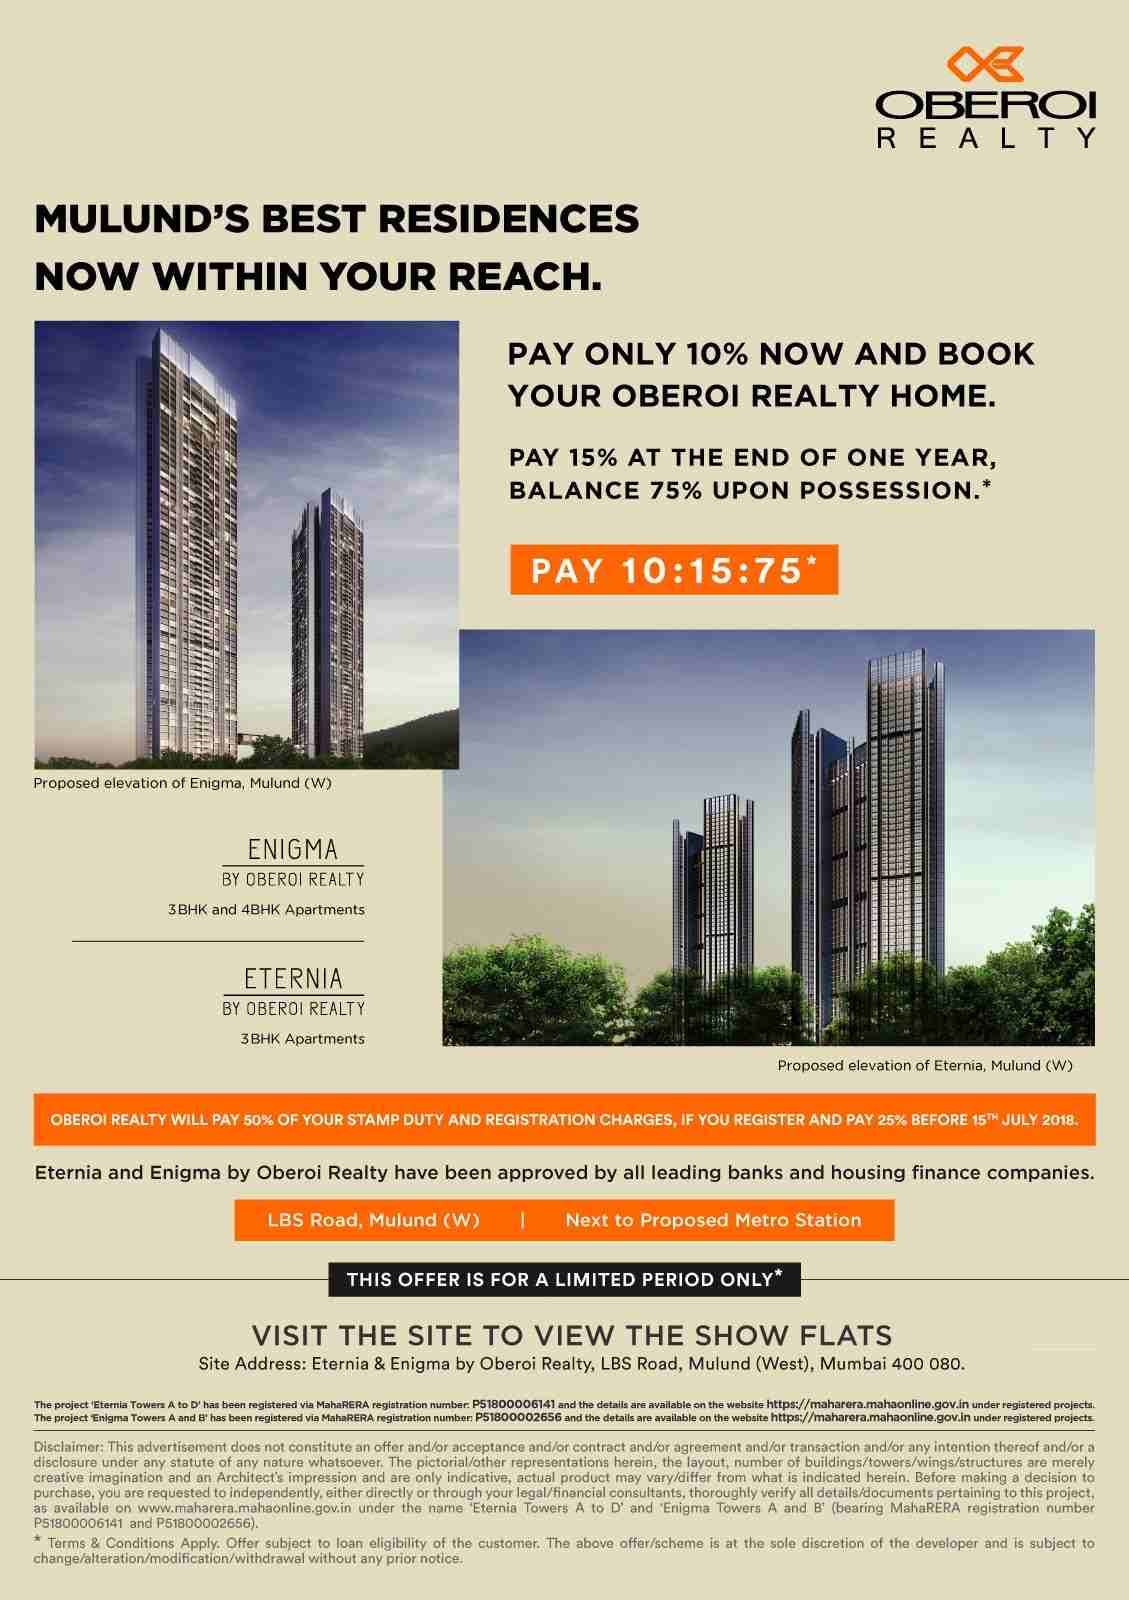 Pay only 10% now and book your Oberoi Realty Home in Mumbai